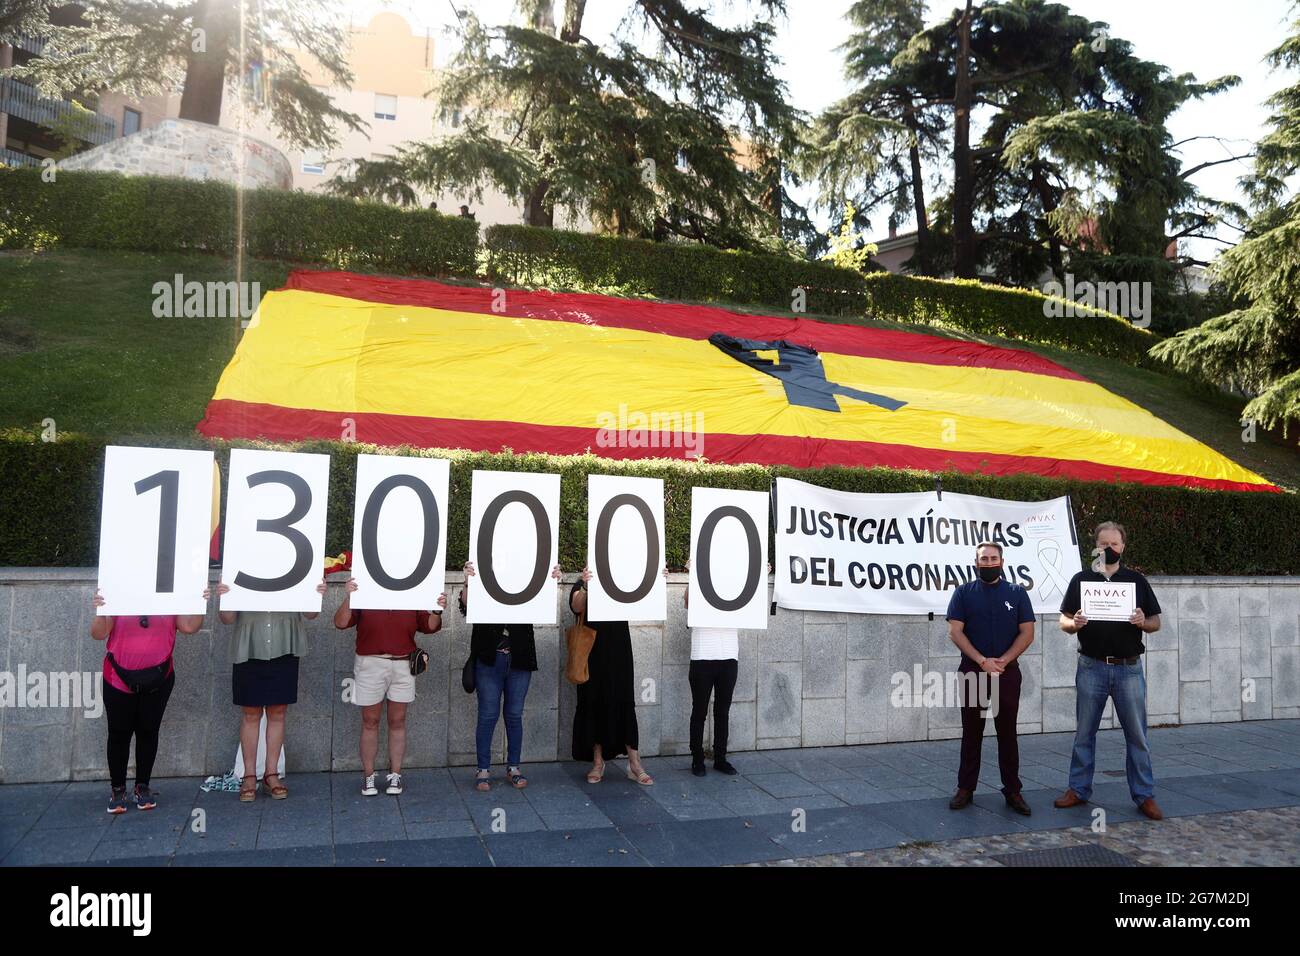 Family members of COVID victims hold up number signs during a state tribute in memory of Spain's coronavirus disease (COVID-19) victims, at the Royal Palace in Madrid, Spain, July 15, 2021. REUTERS/Javier Barbancho Stock Photo